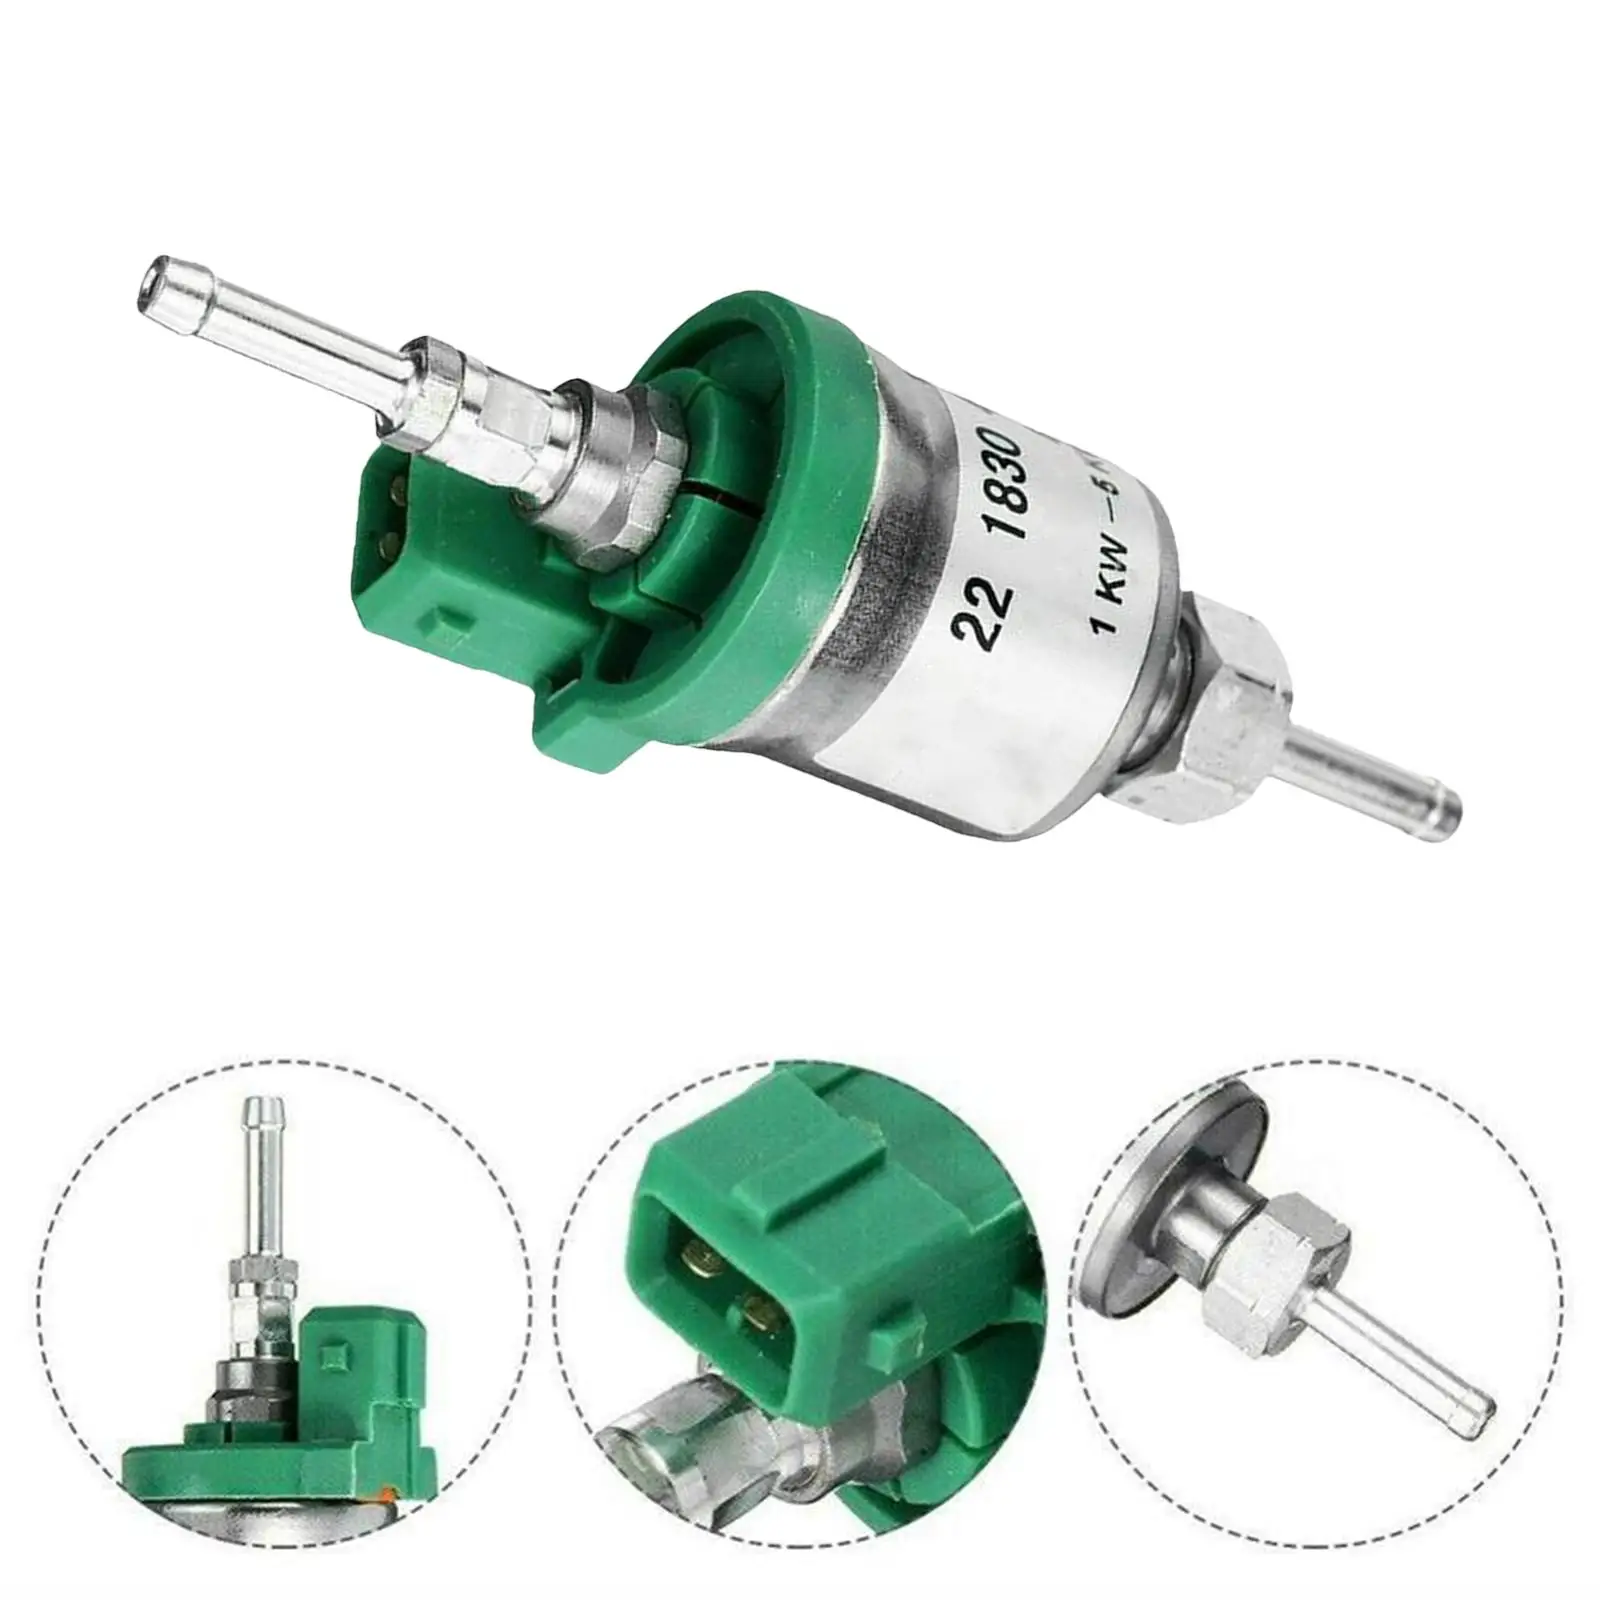 Car Oil Fuel Pump 12V Replacement Air Parking Heater Metering Pump for Webasto Eberspacher 1-5kW Accessory High Quality